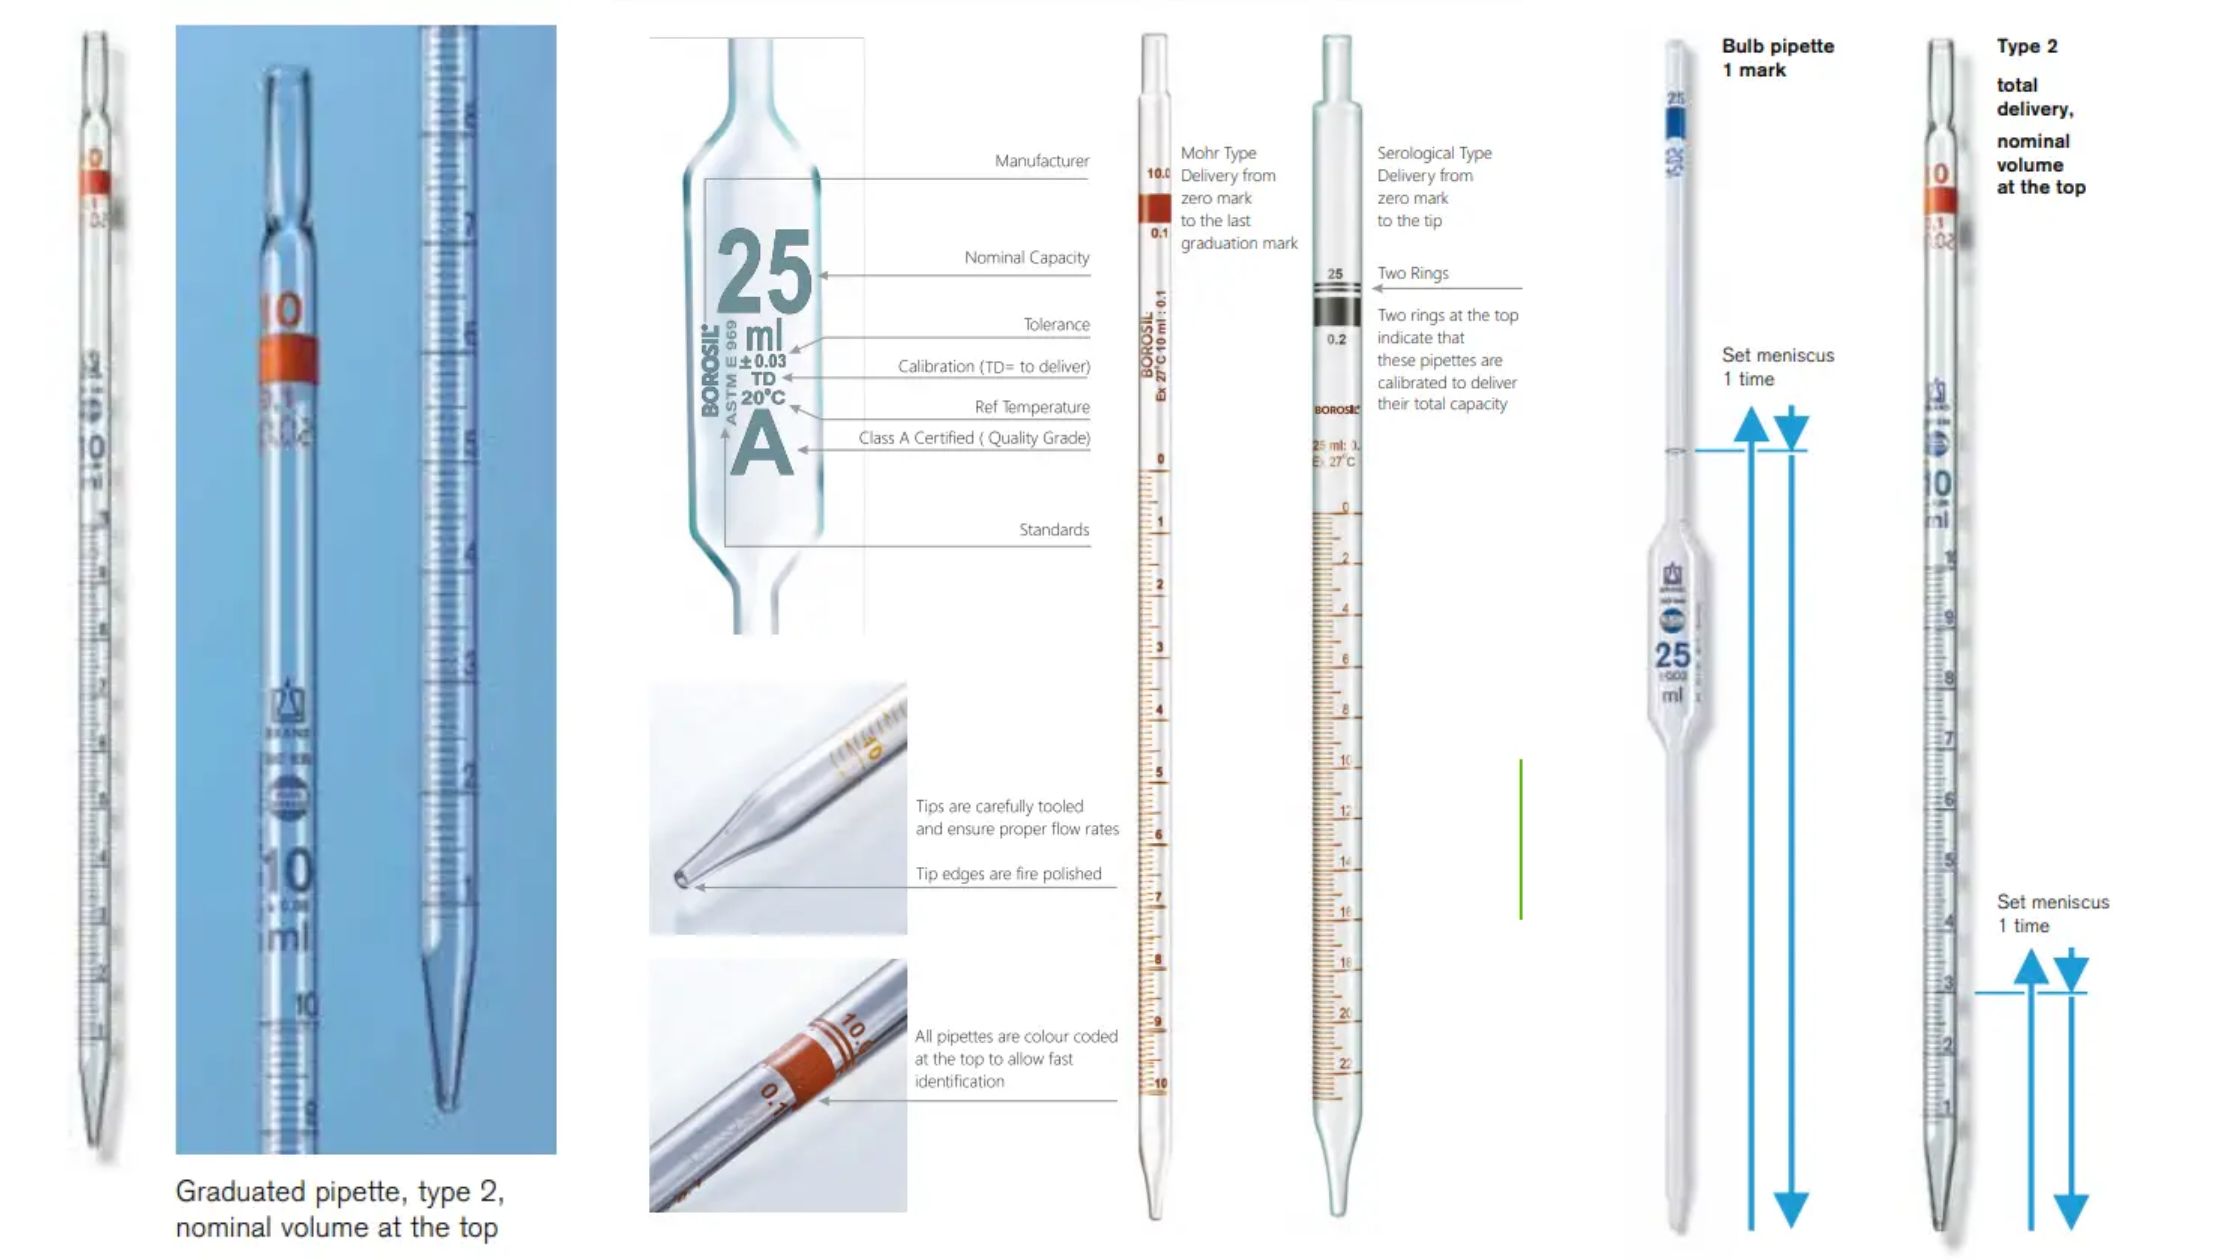 Glass Pipettes - Definition, Principle, Types, Handling, and Uses